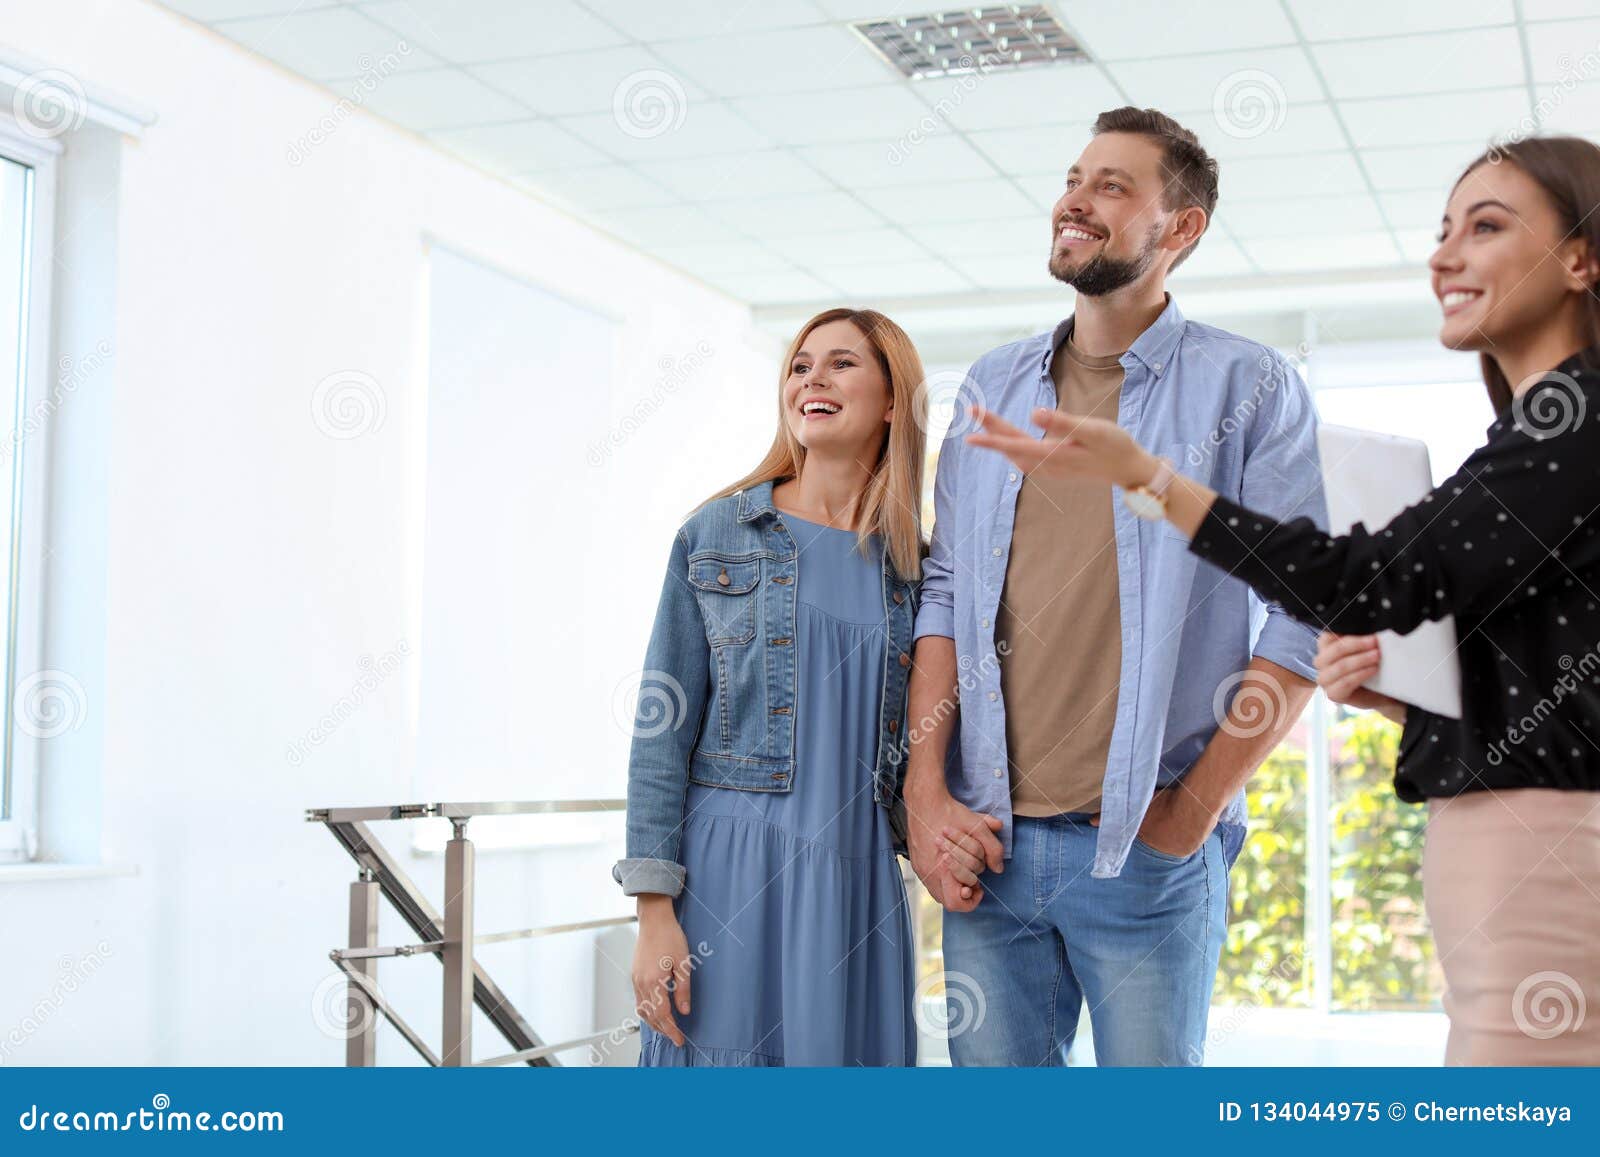 Female Real Estate Agent Showing New House To Couple Stock Image Image Of Caucasian 